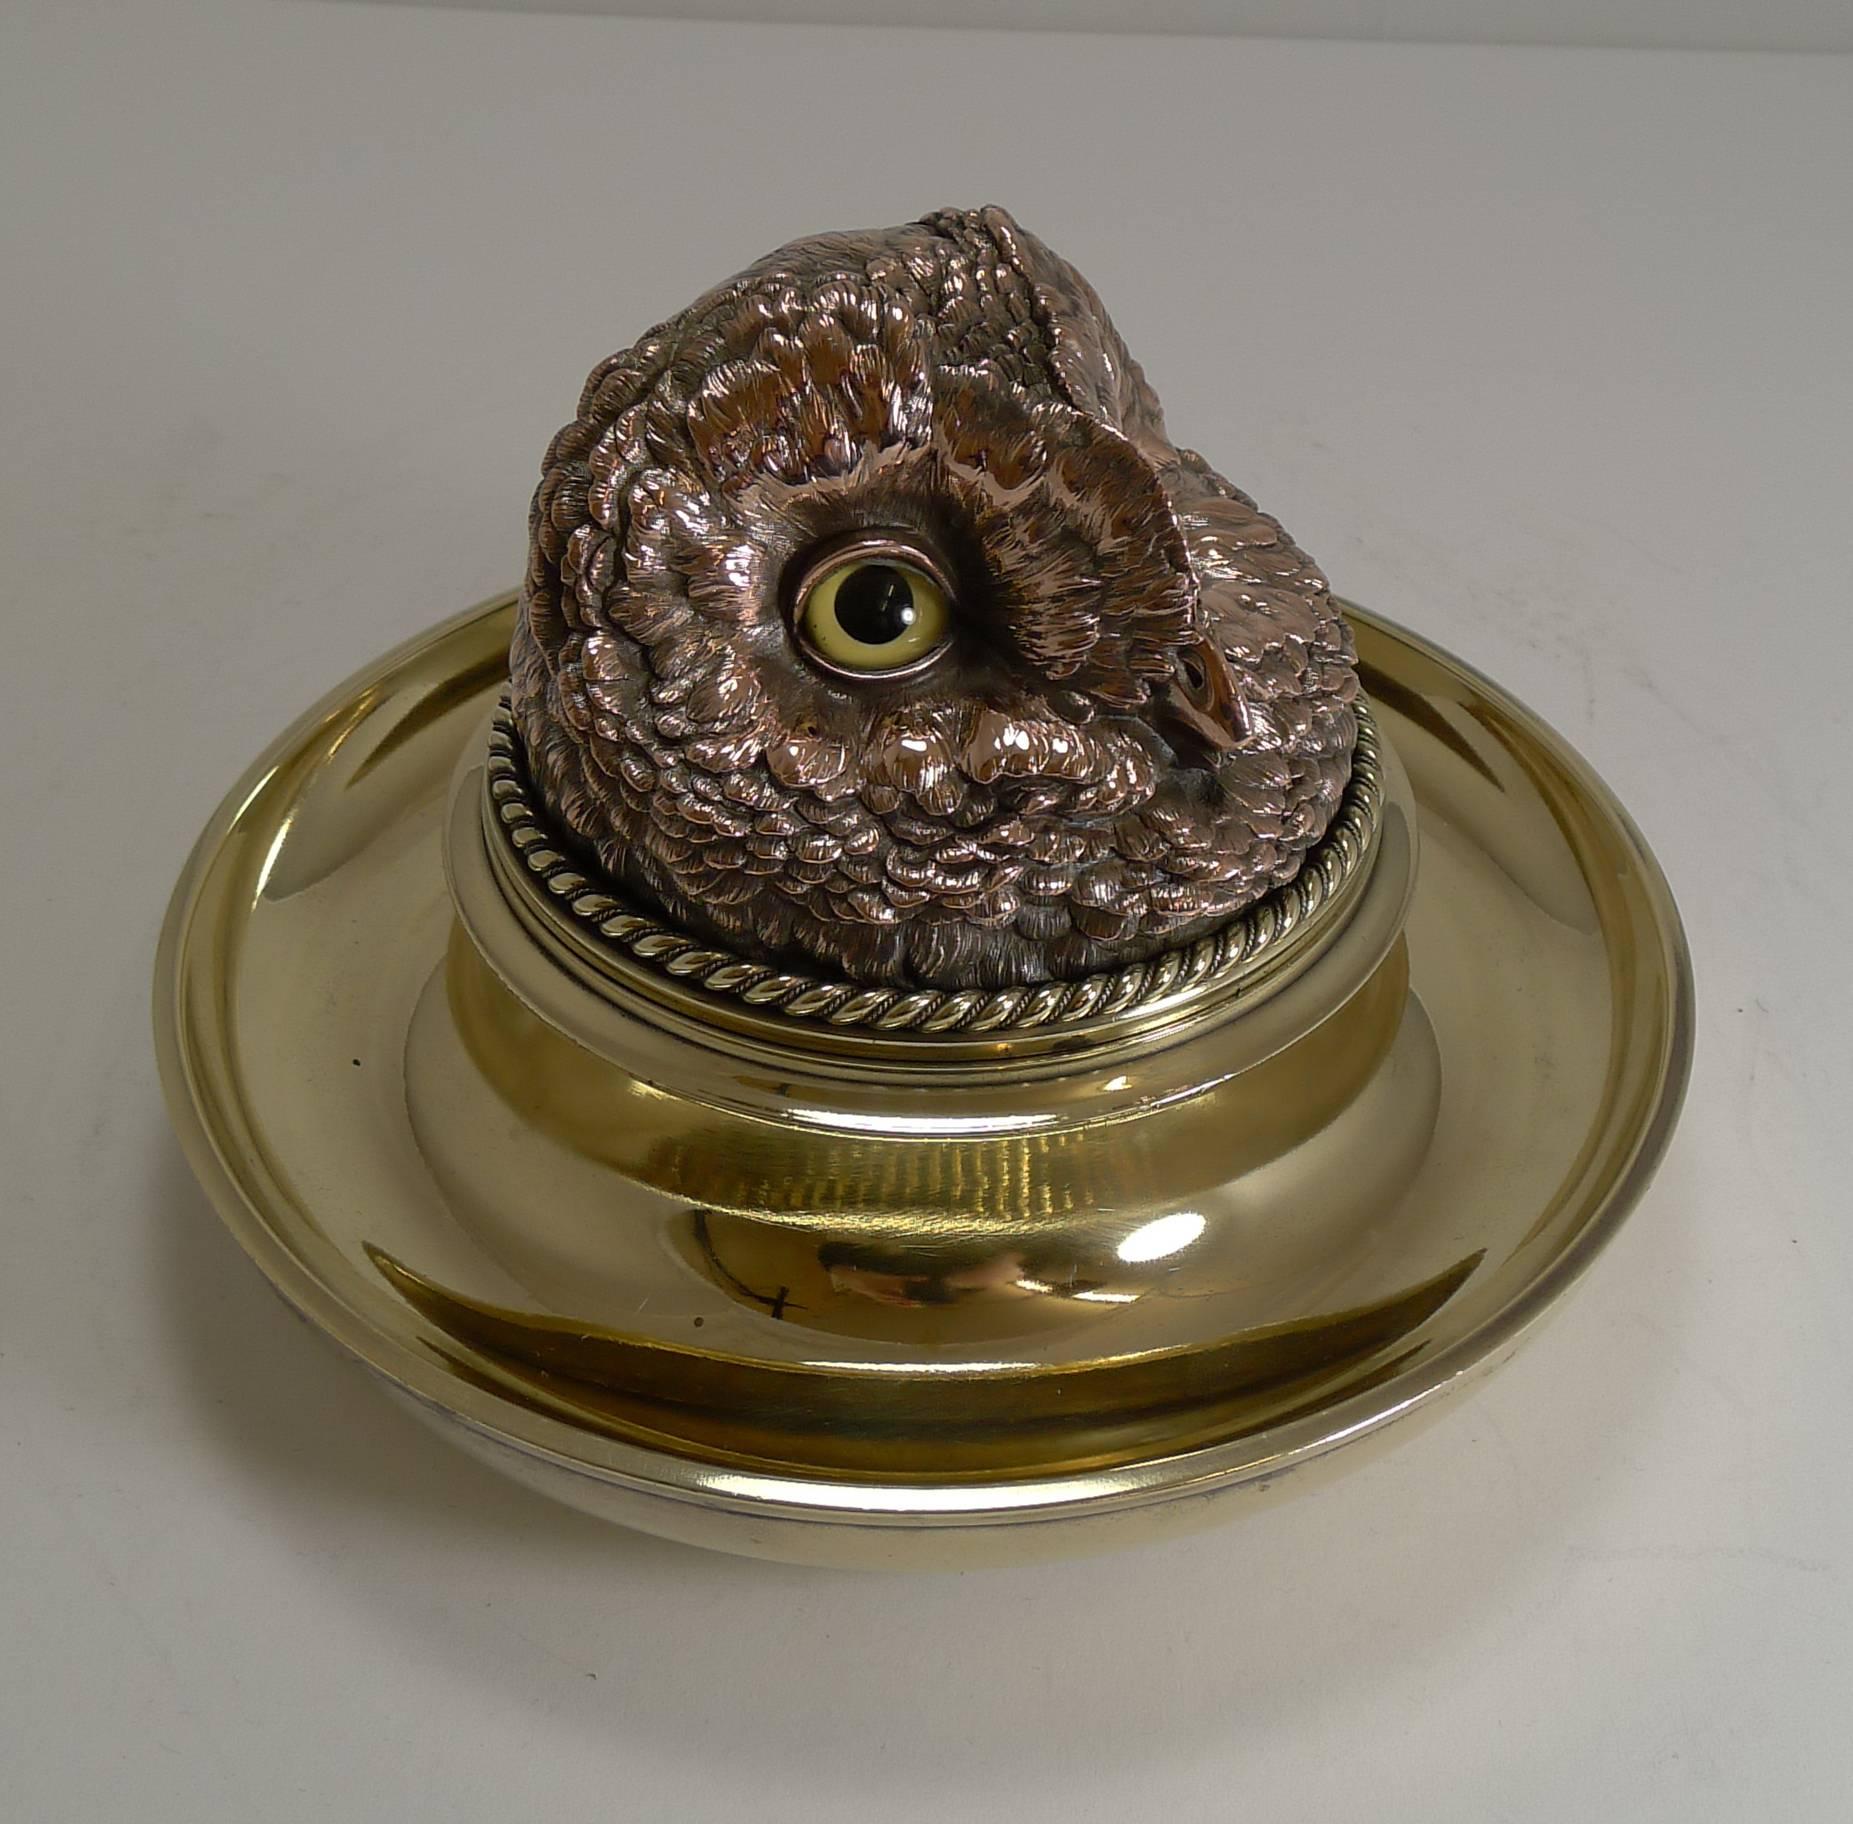 A truly outstanding and rare find, this is an outstanding Victorian figural inkwell made from a winning combination of brass and copper and retaining his wonderful two original glass eyes without damage.

The size is impressive, this is one to